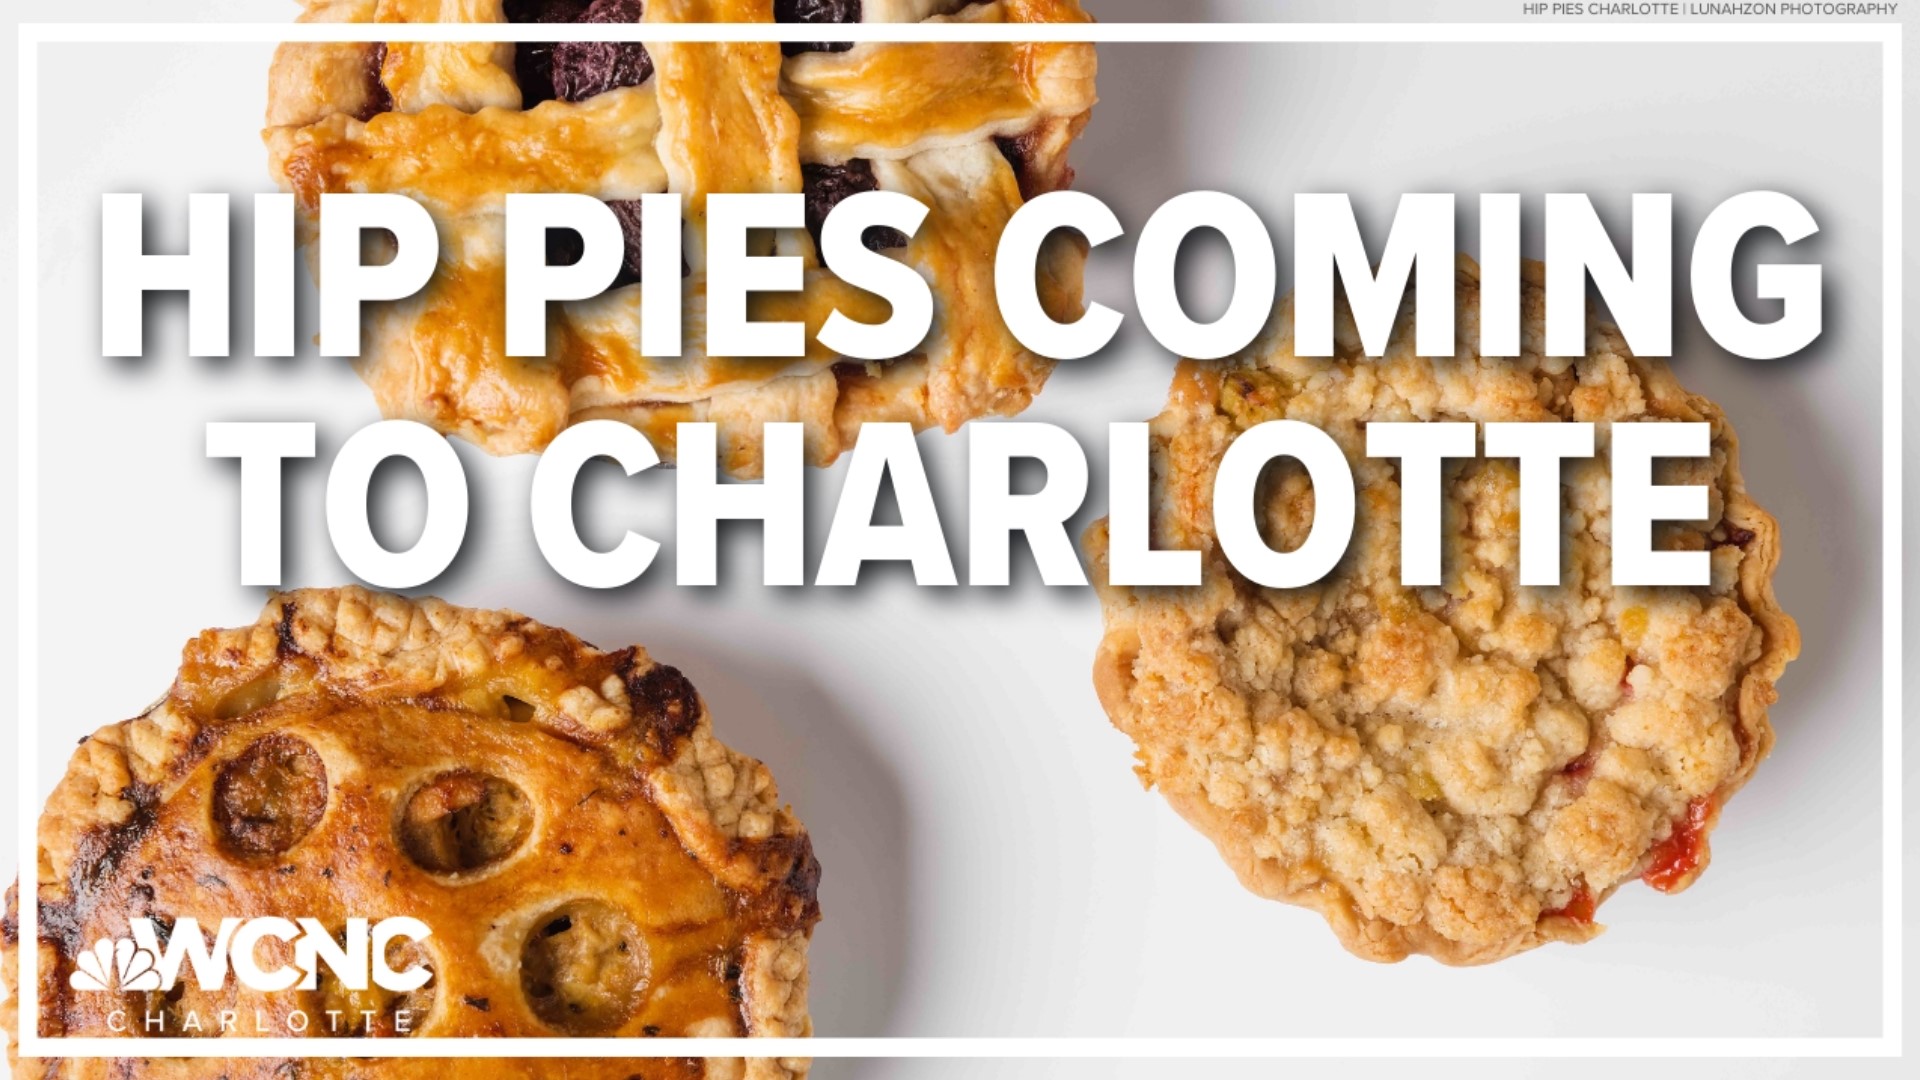 Hip Pies, described by Mother Earth Group as "a haven of pies and good vibes" is opening at the Charlotte Visit Info Center on South Tryon Street on April 20.